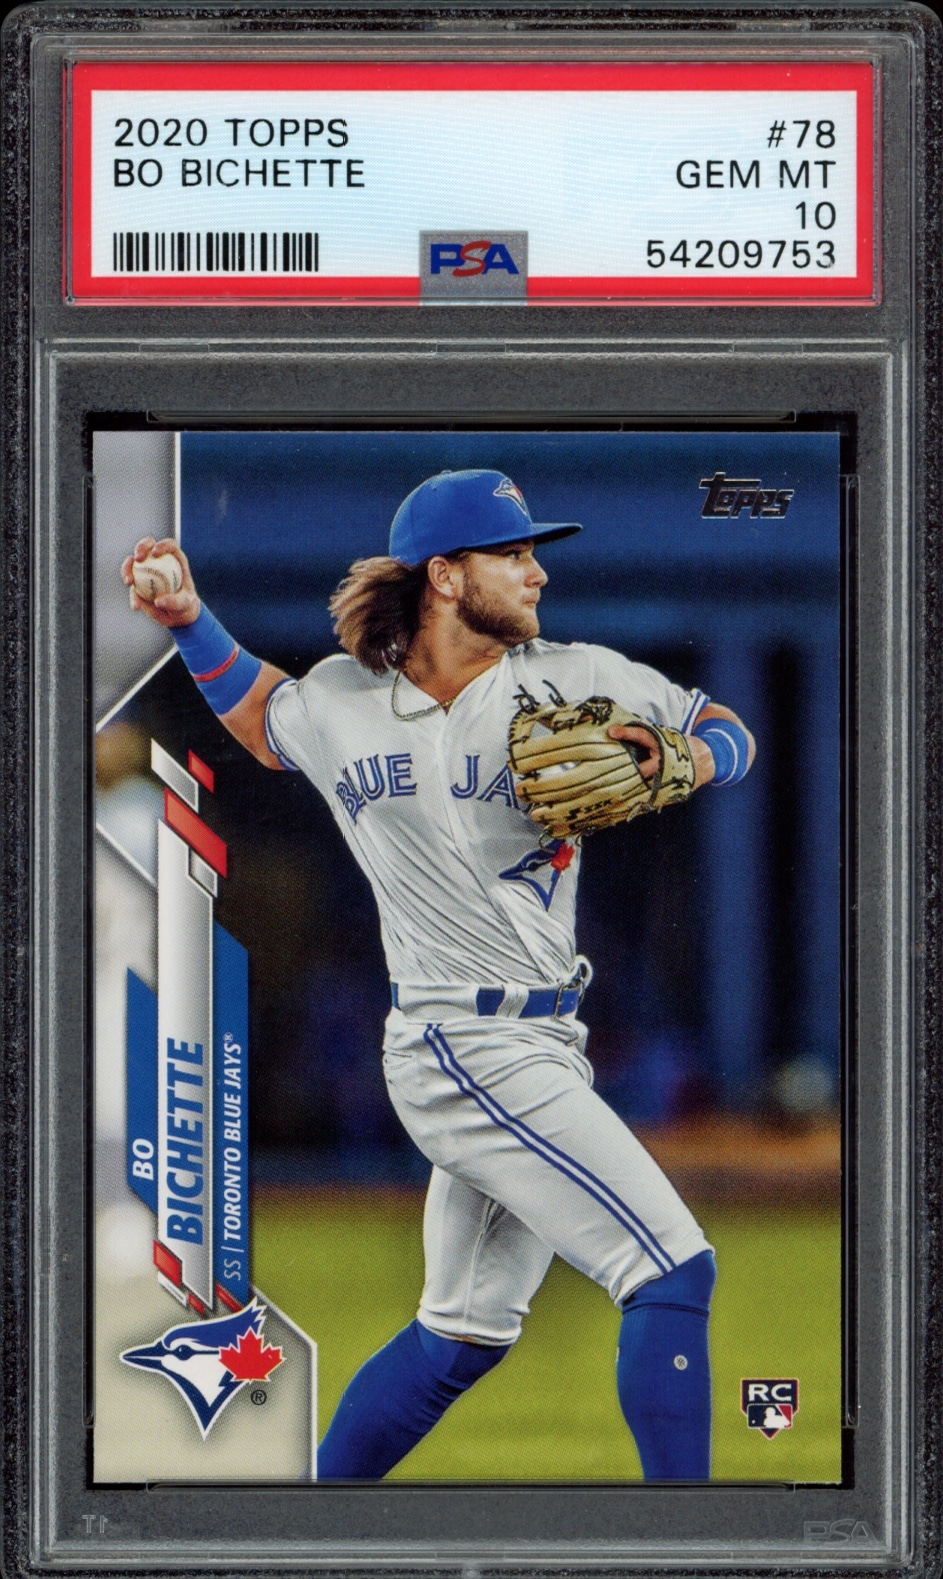 PSA 10 graded 2020 Topps Series card featuring Toronto Blue Jays player Bo Bichette in action.